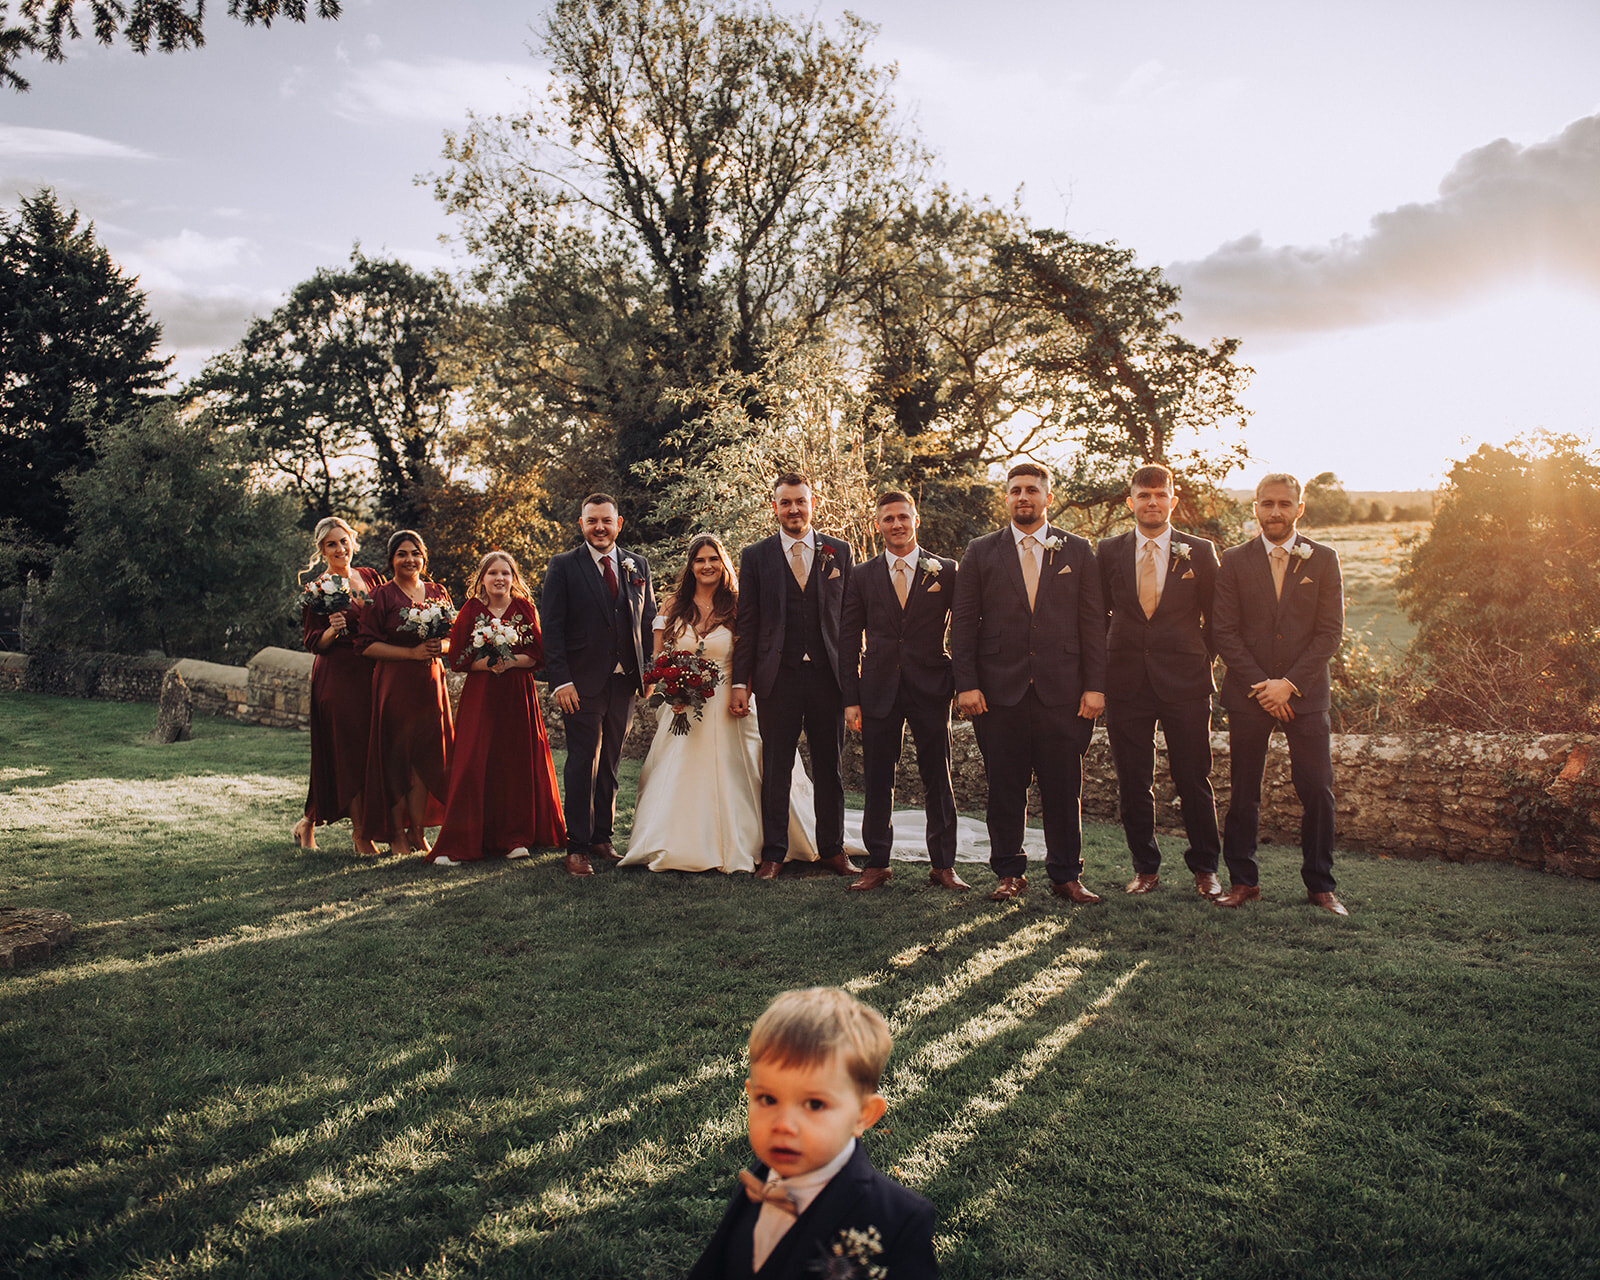 Sunset group shot interrupted by bride and groom's son